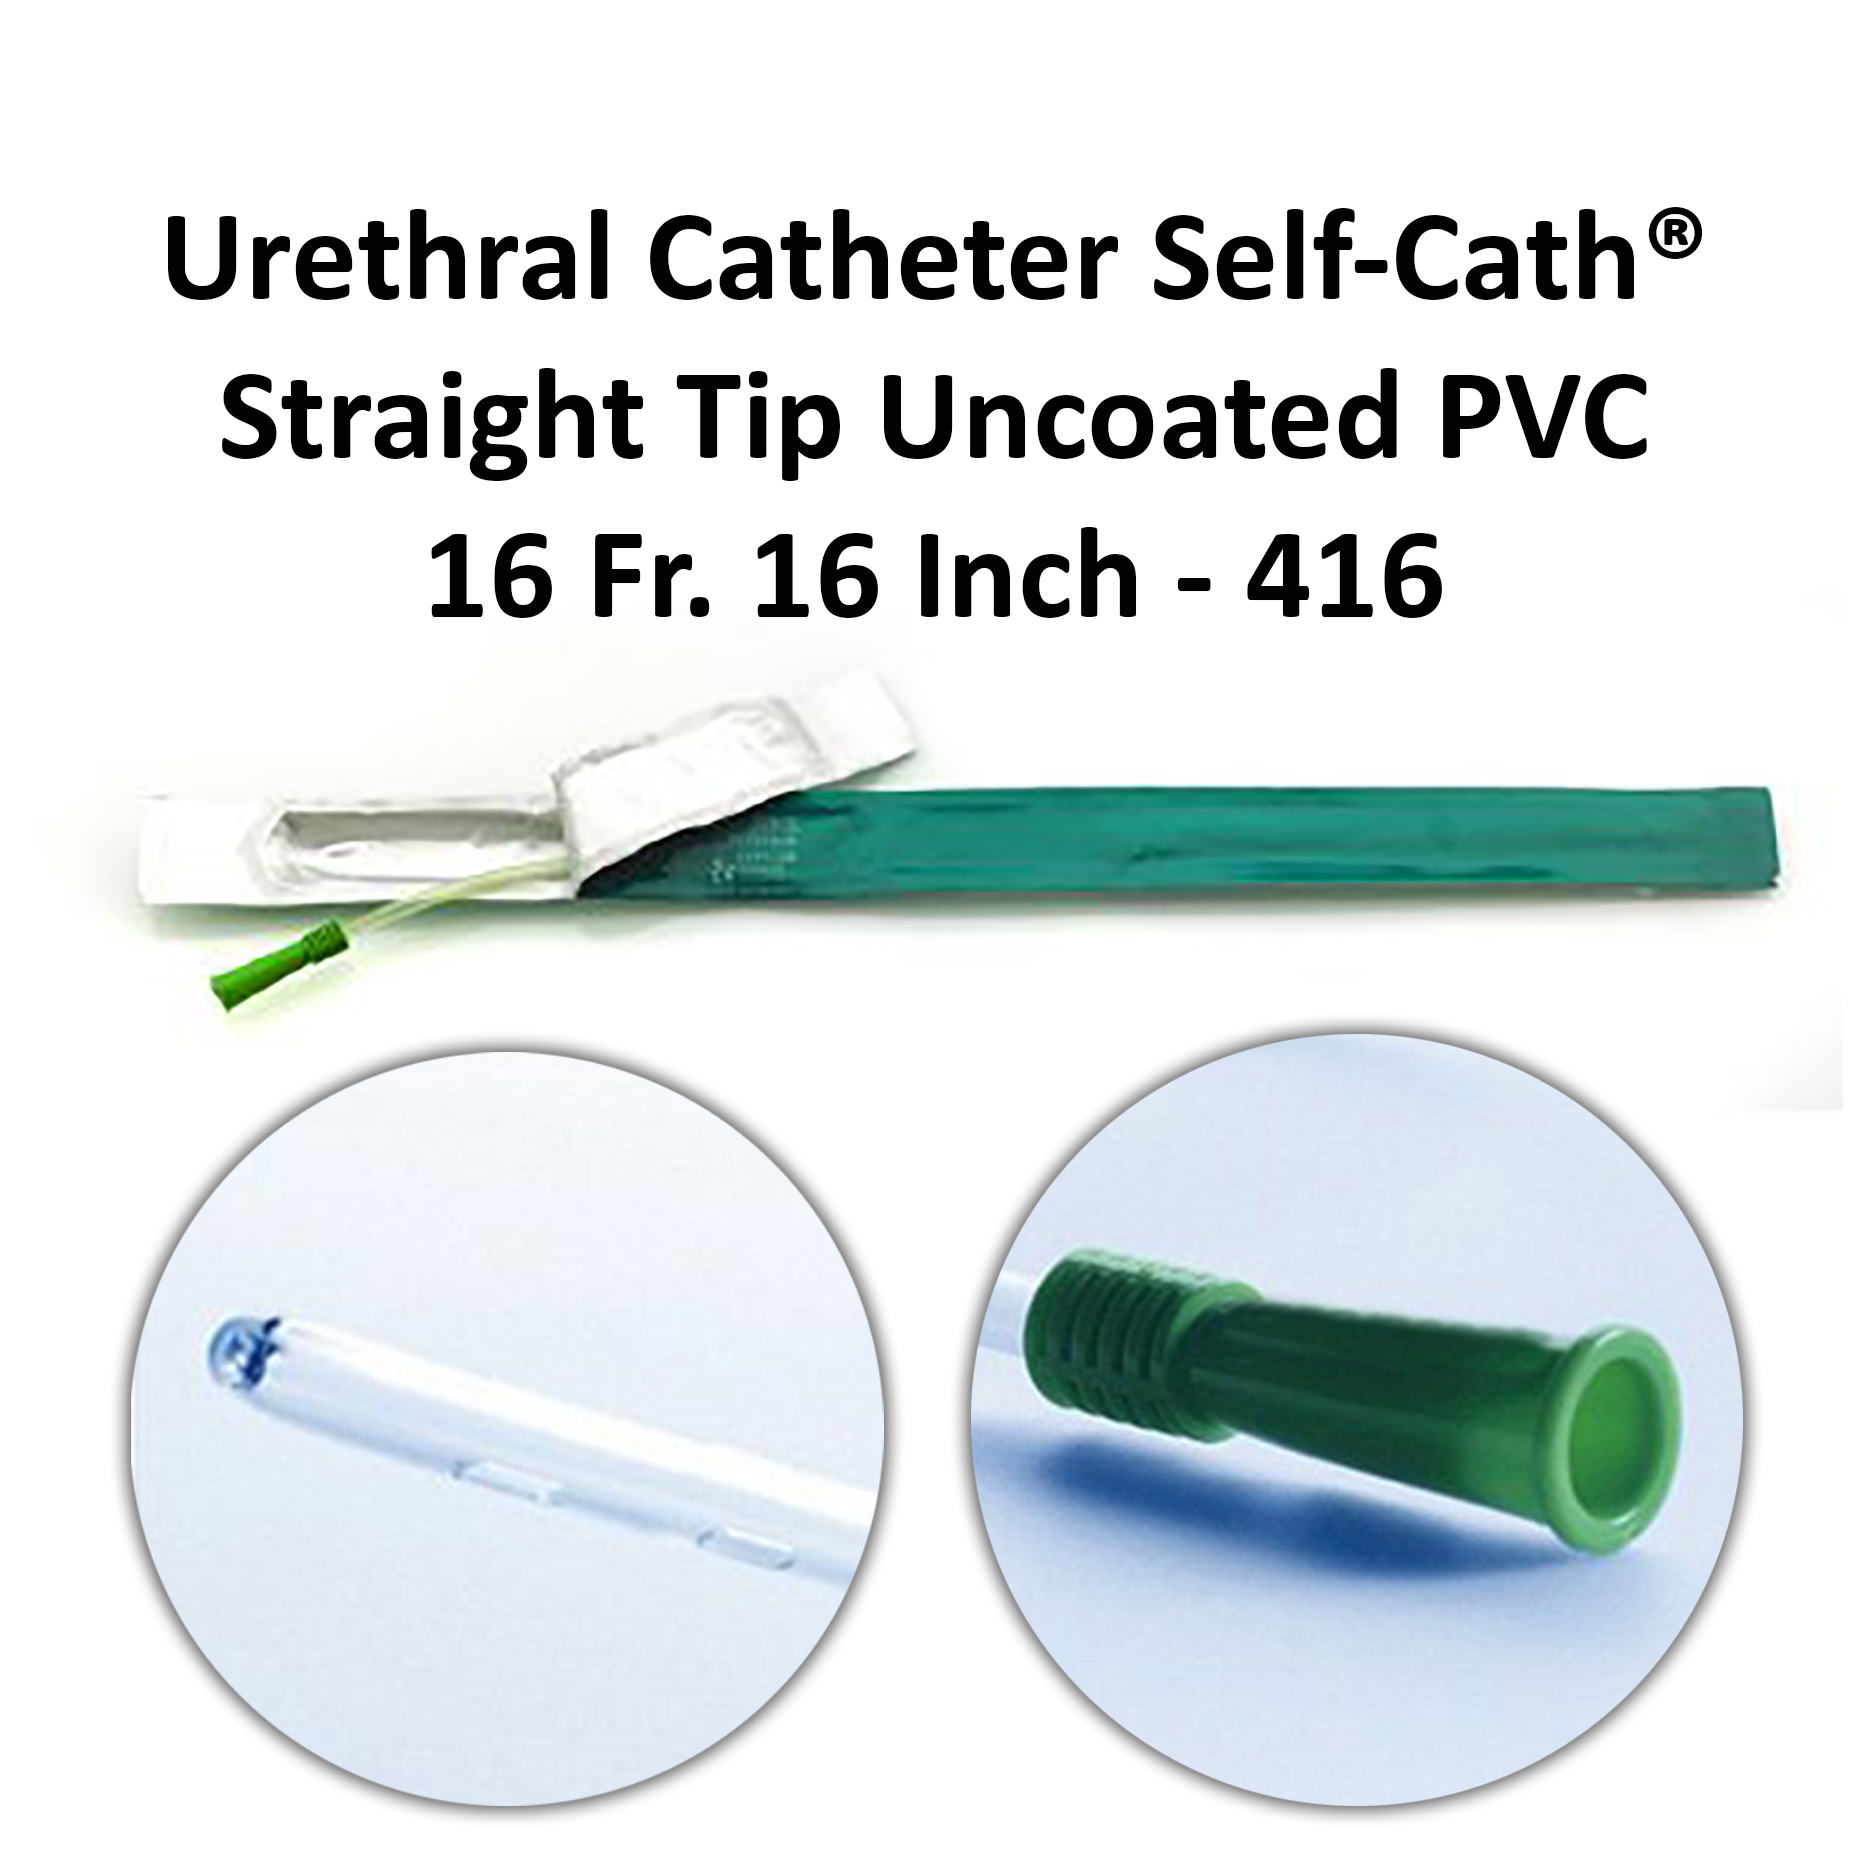 Urethral Catheter Self-Cath® Straight Tip Uncoated PVC 16 Fr. 16 Inch - 416